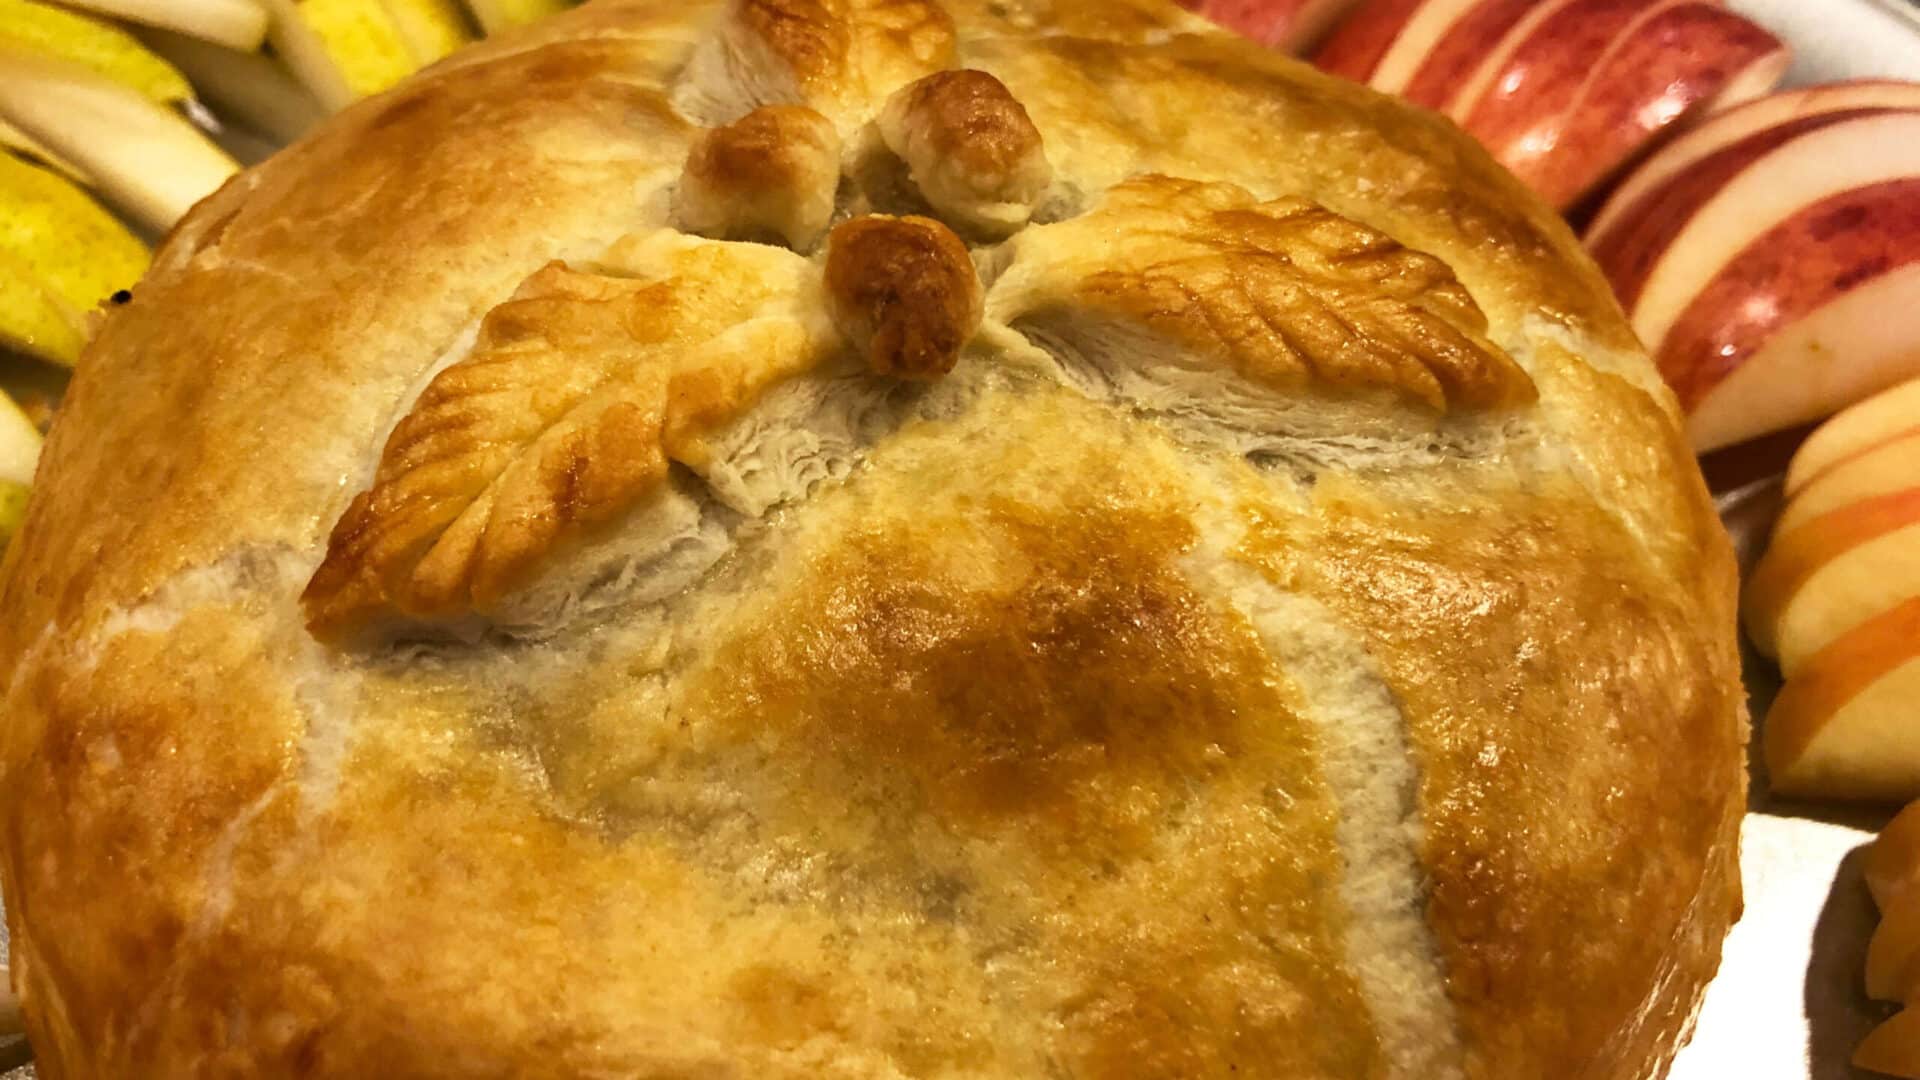 Brie en Croute; golden puff pastry filled with Brie cheese and surrounded by yellpear and red apple slices